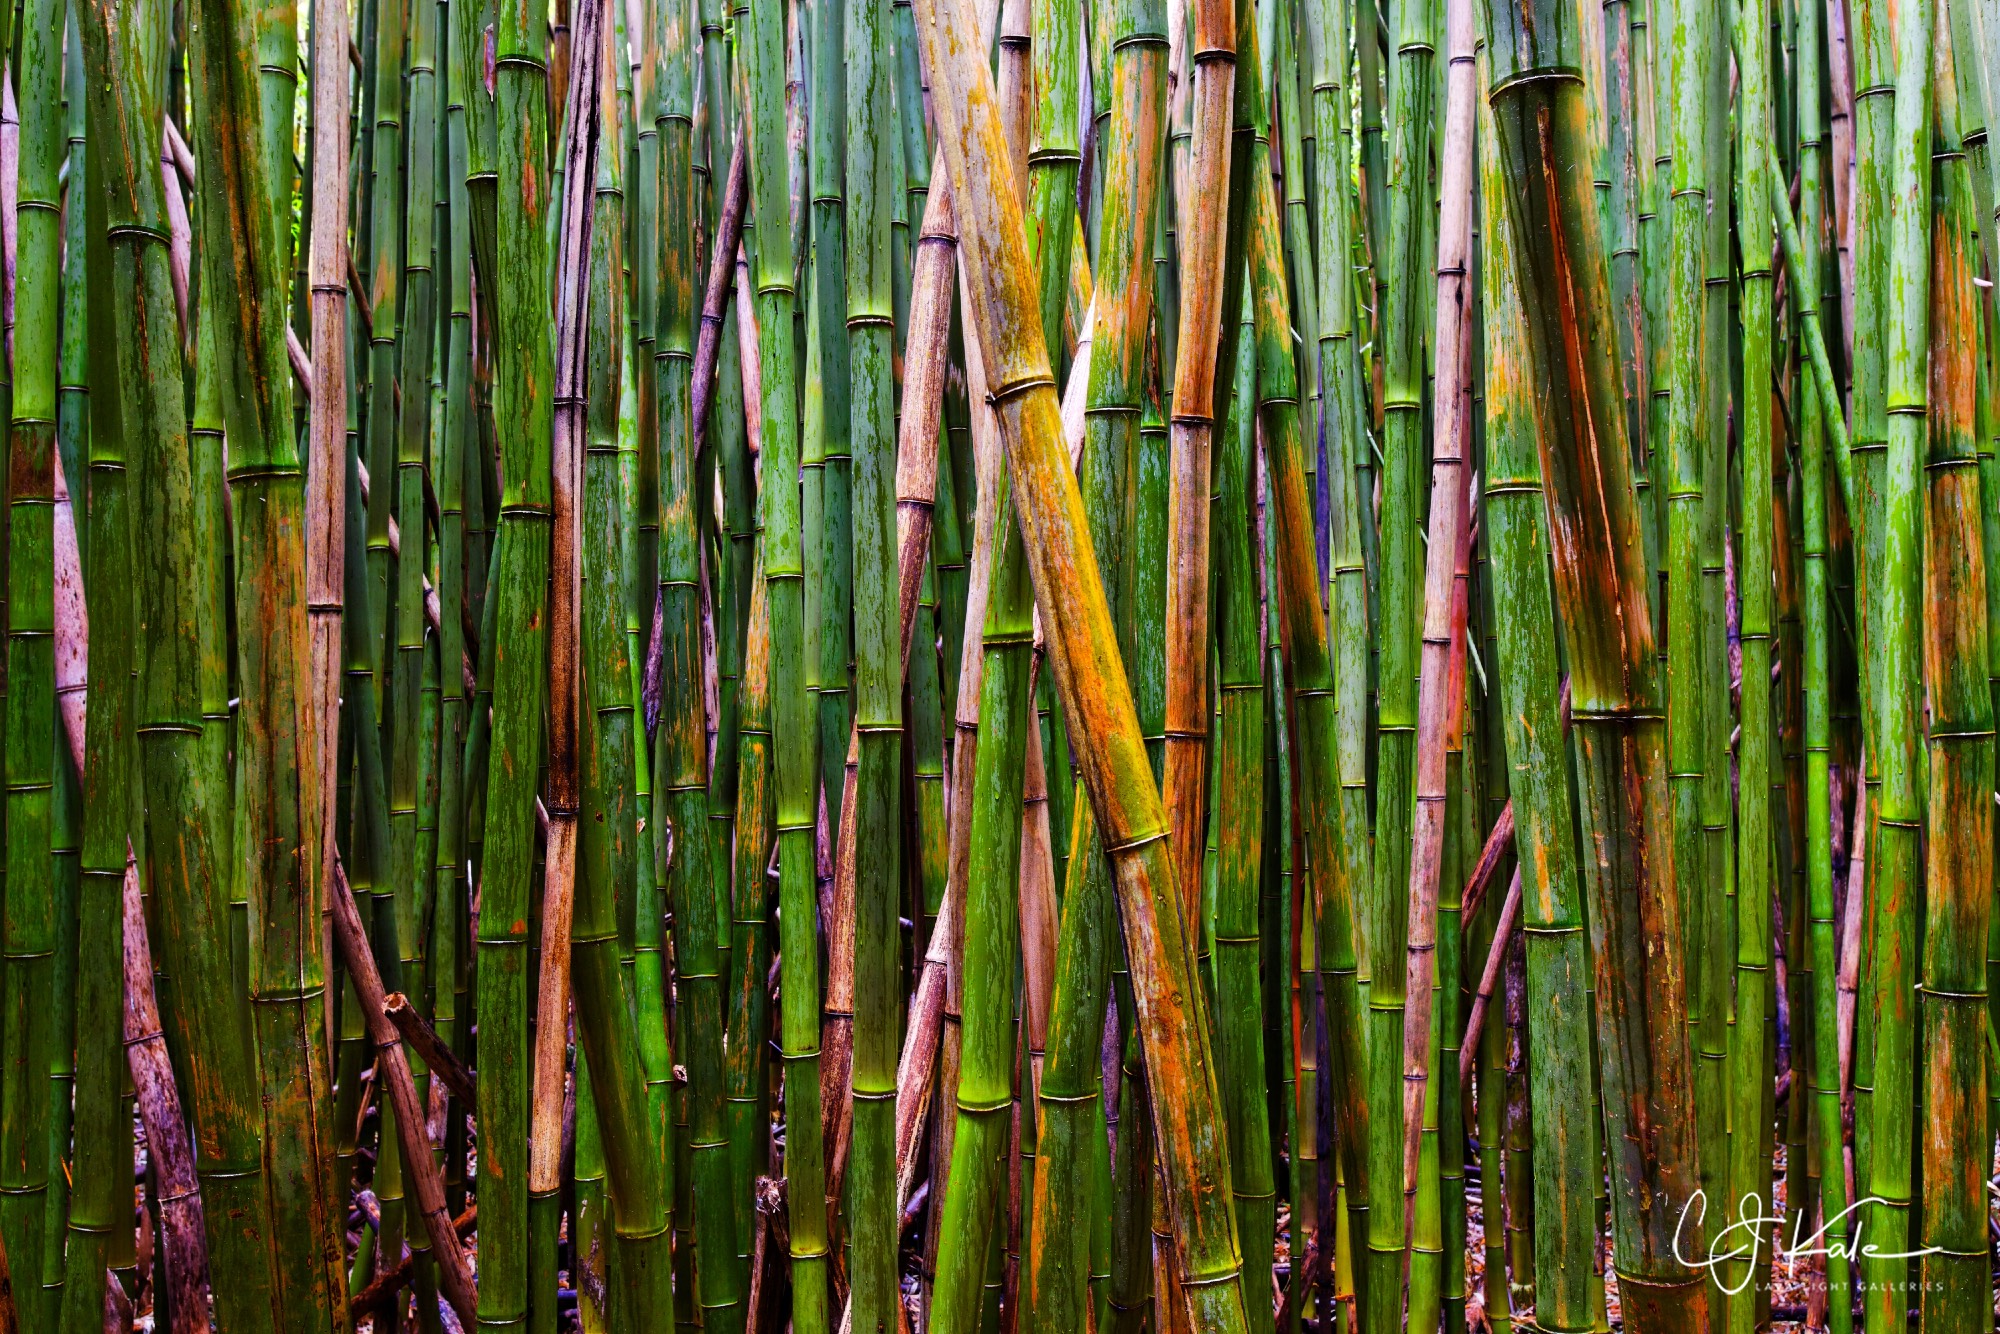 Nothing but bamboo.